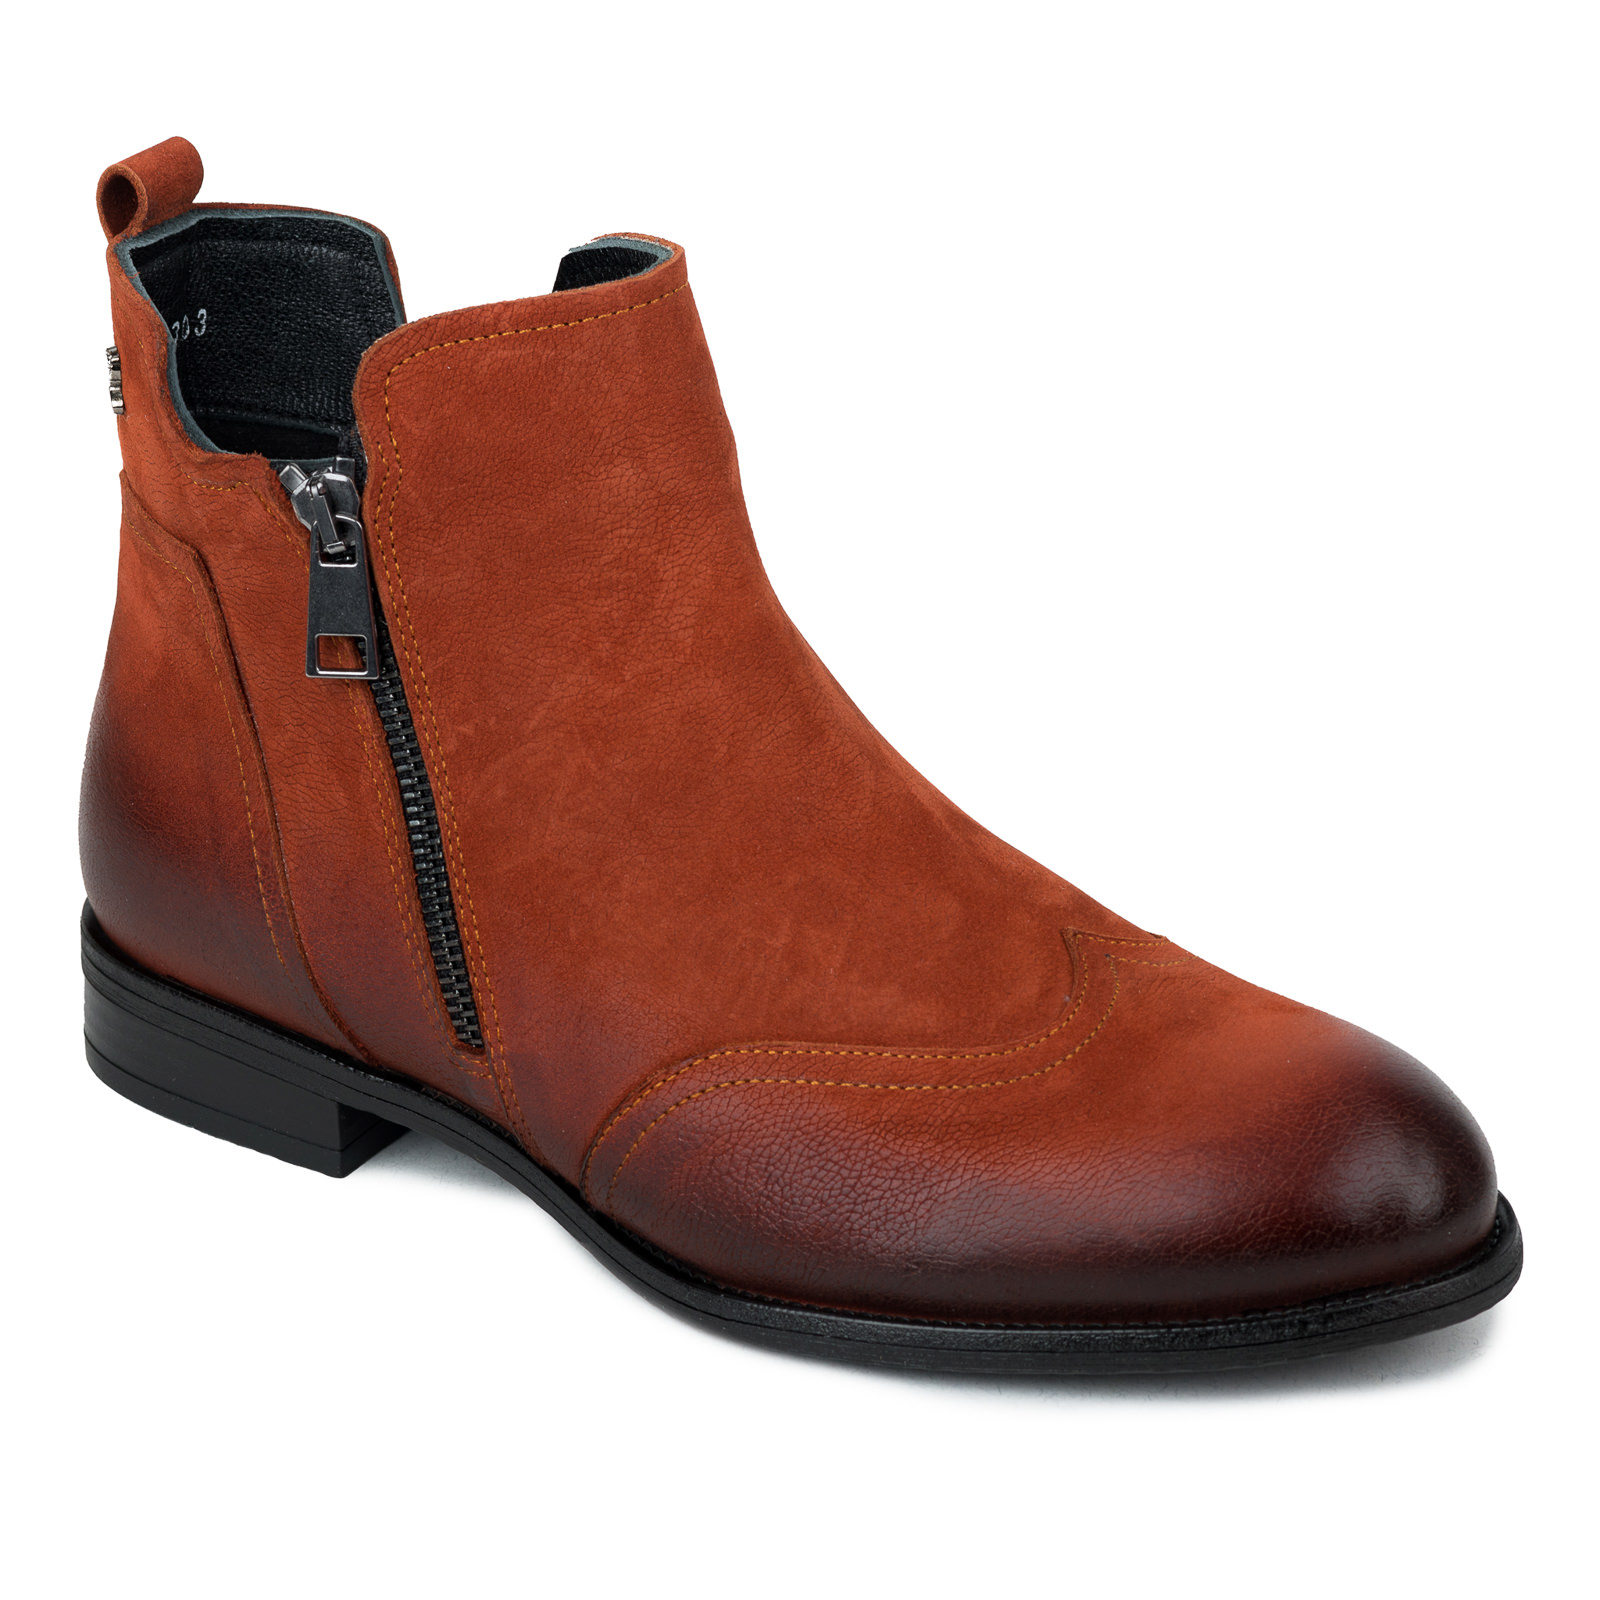 Leather ankle boots B442 - ORANGE